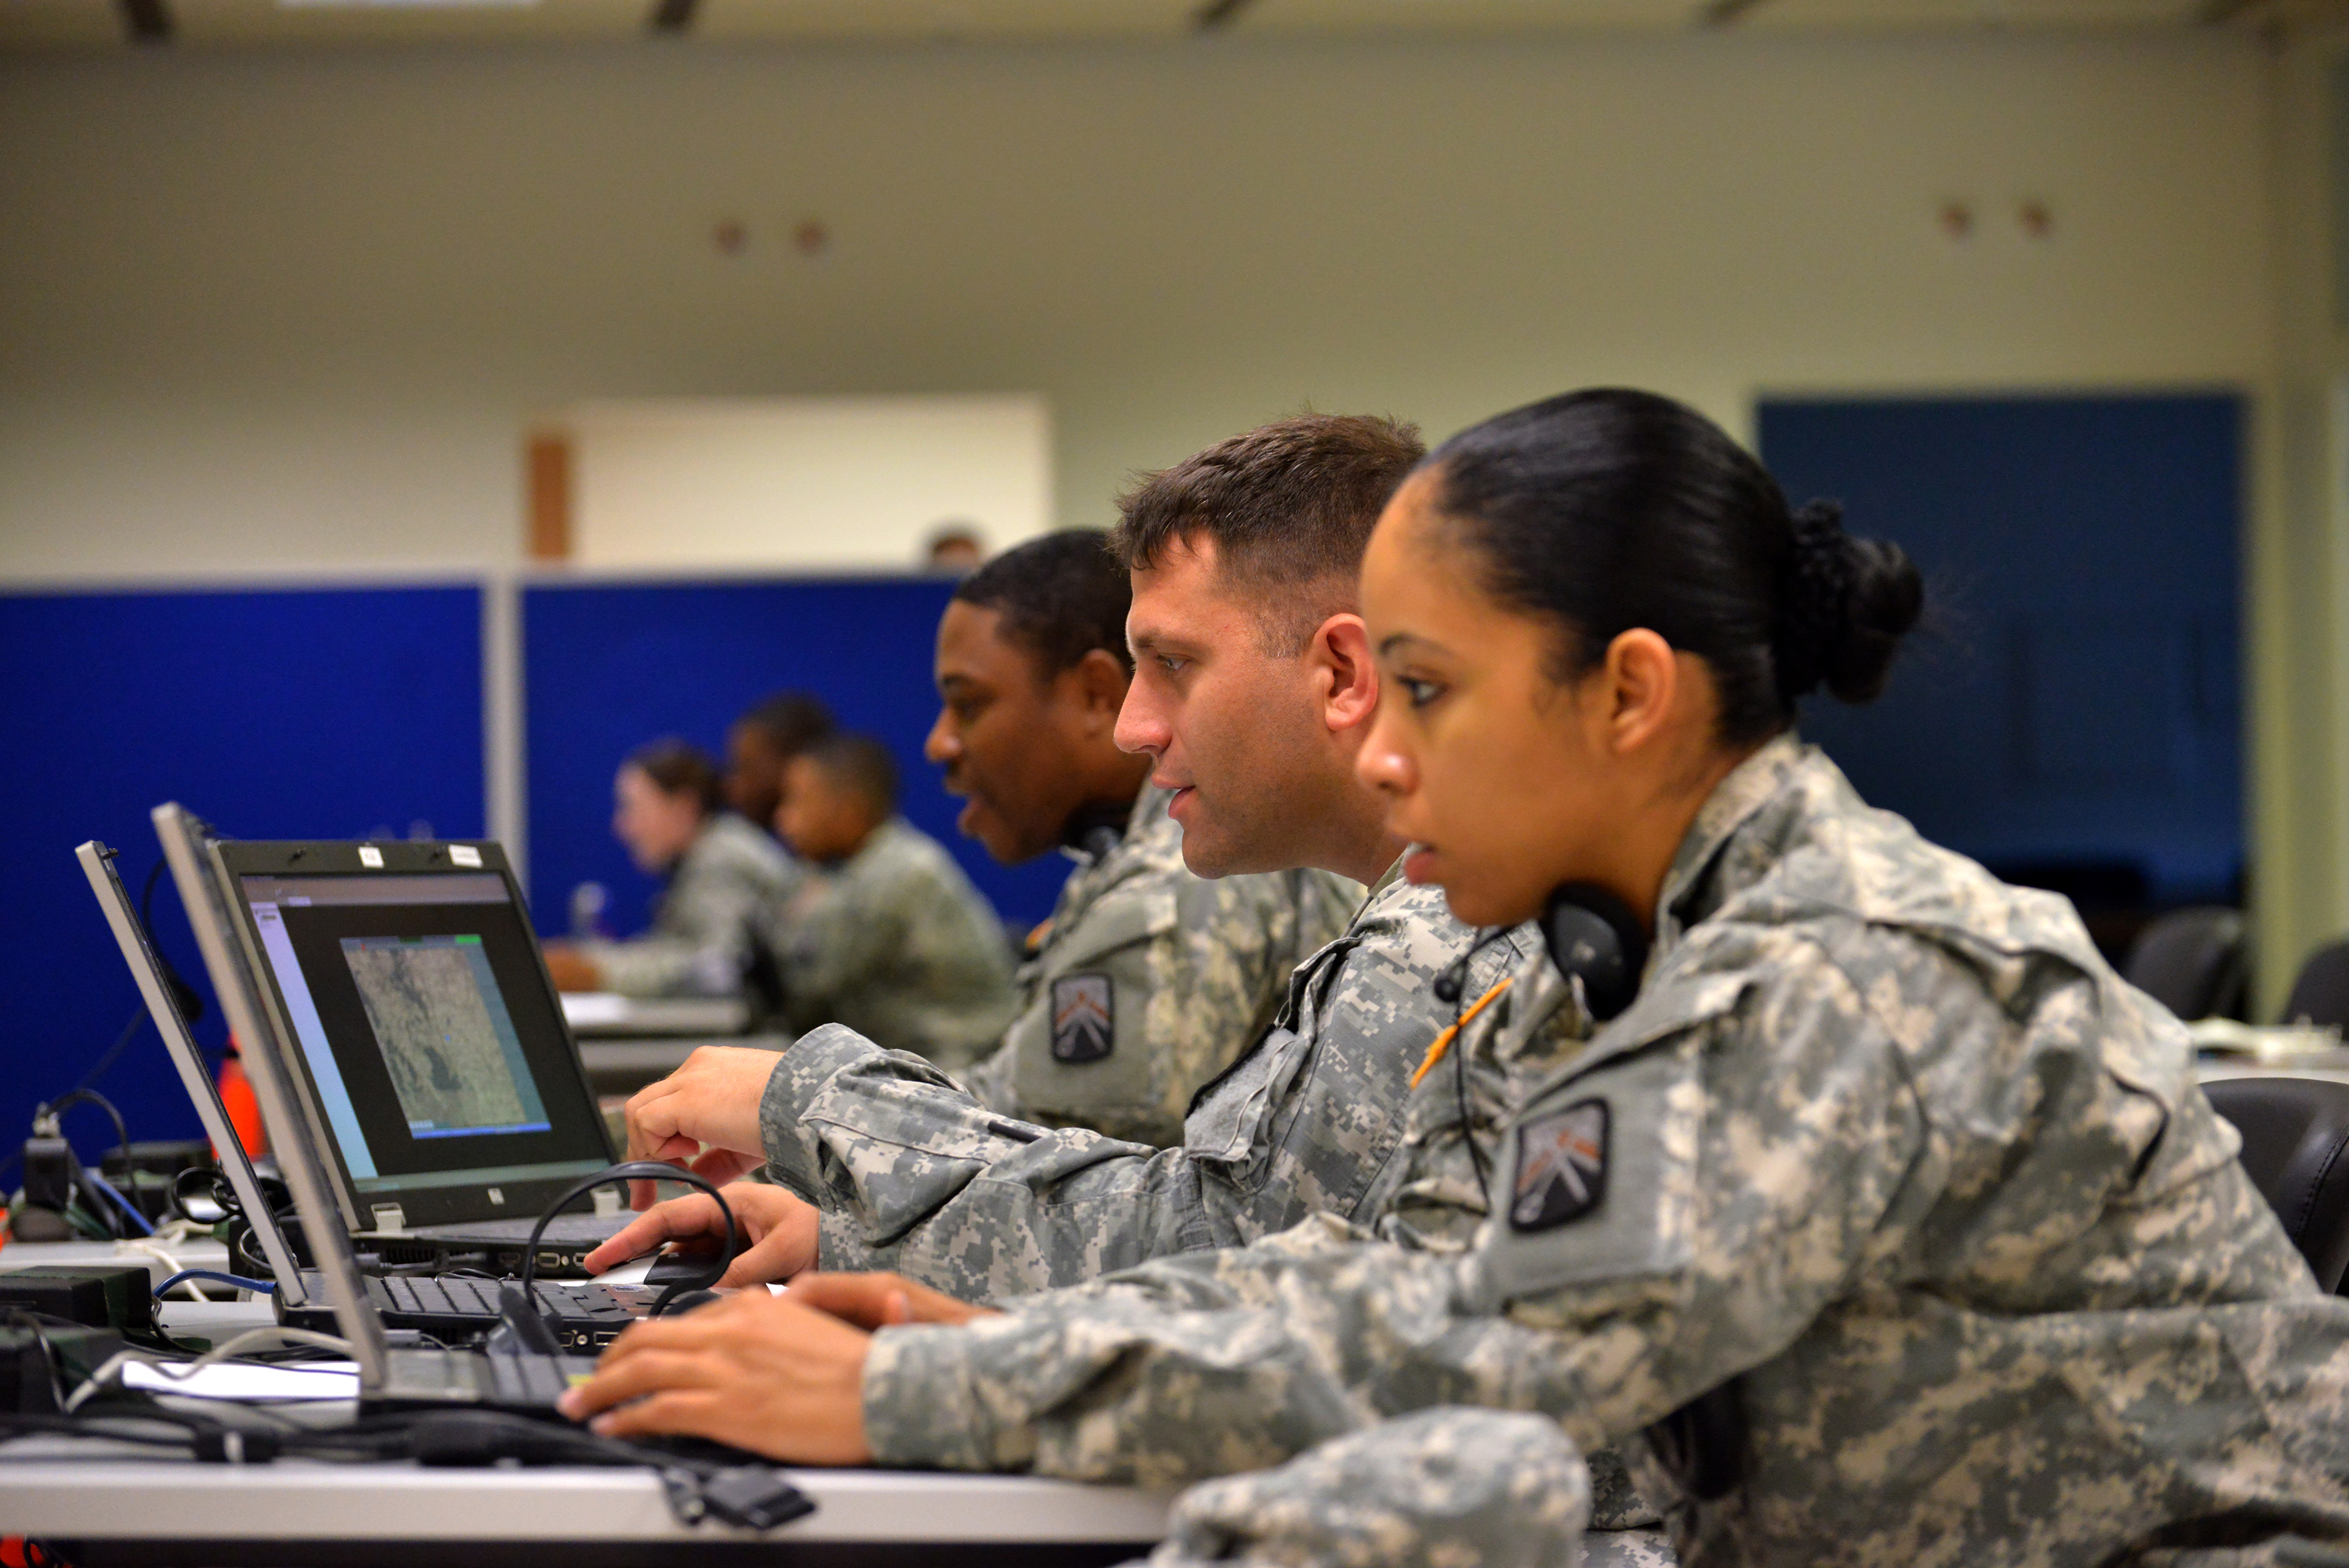 Soldiers simulate finance operations in a distributed exercise. Credit: US Army